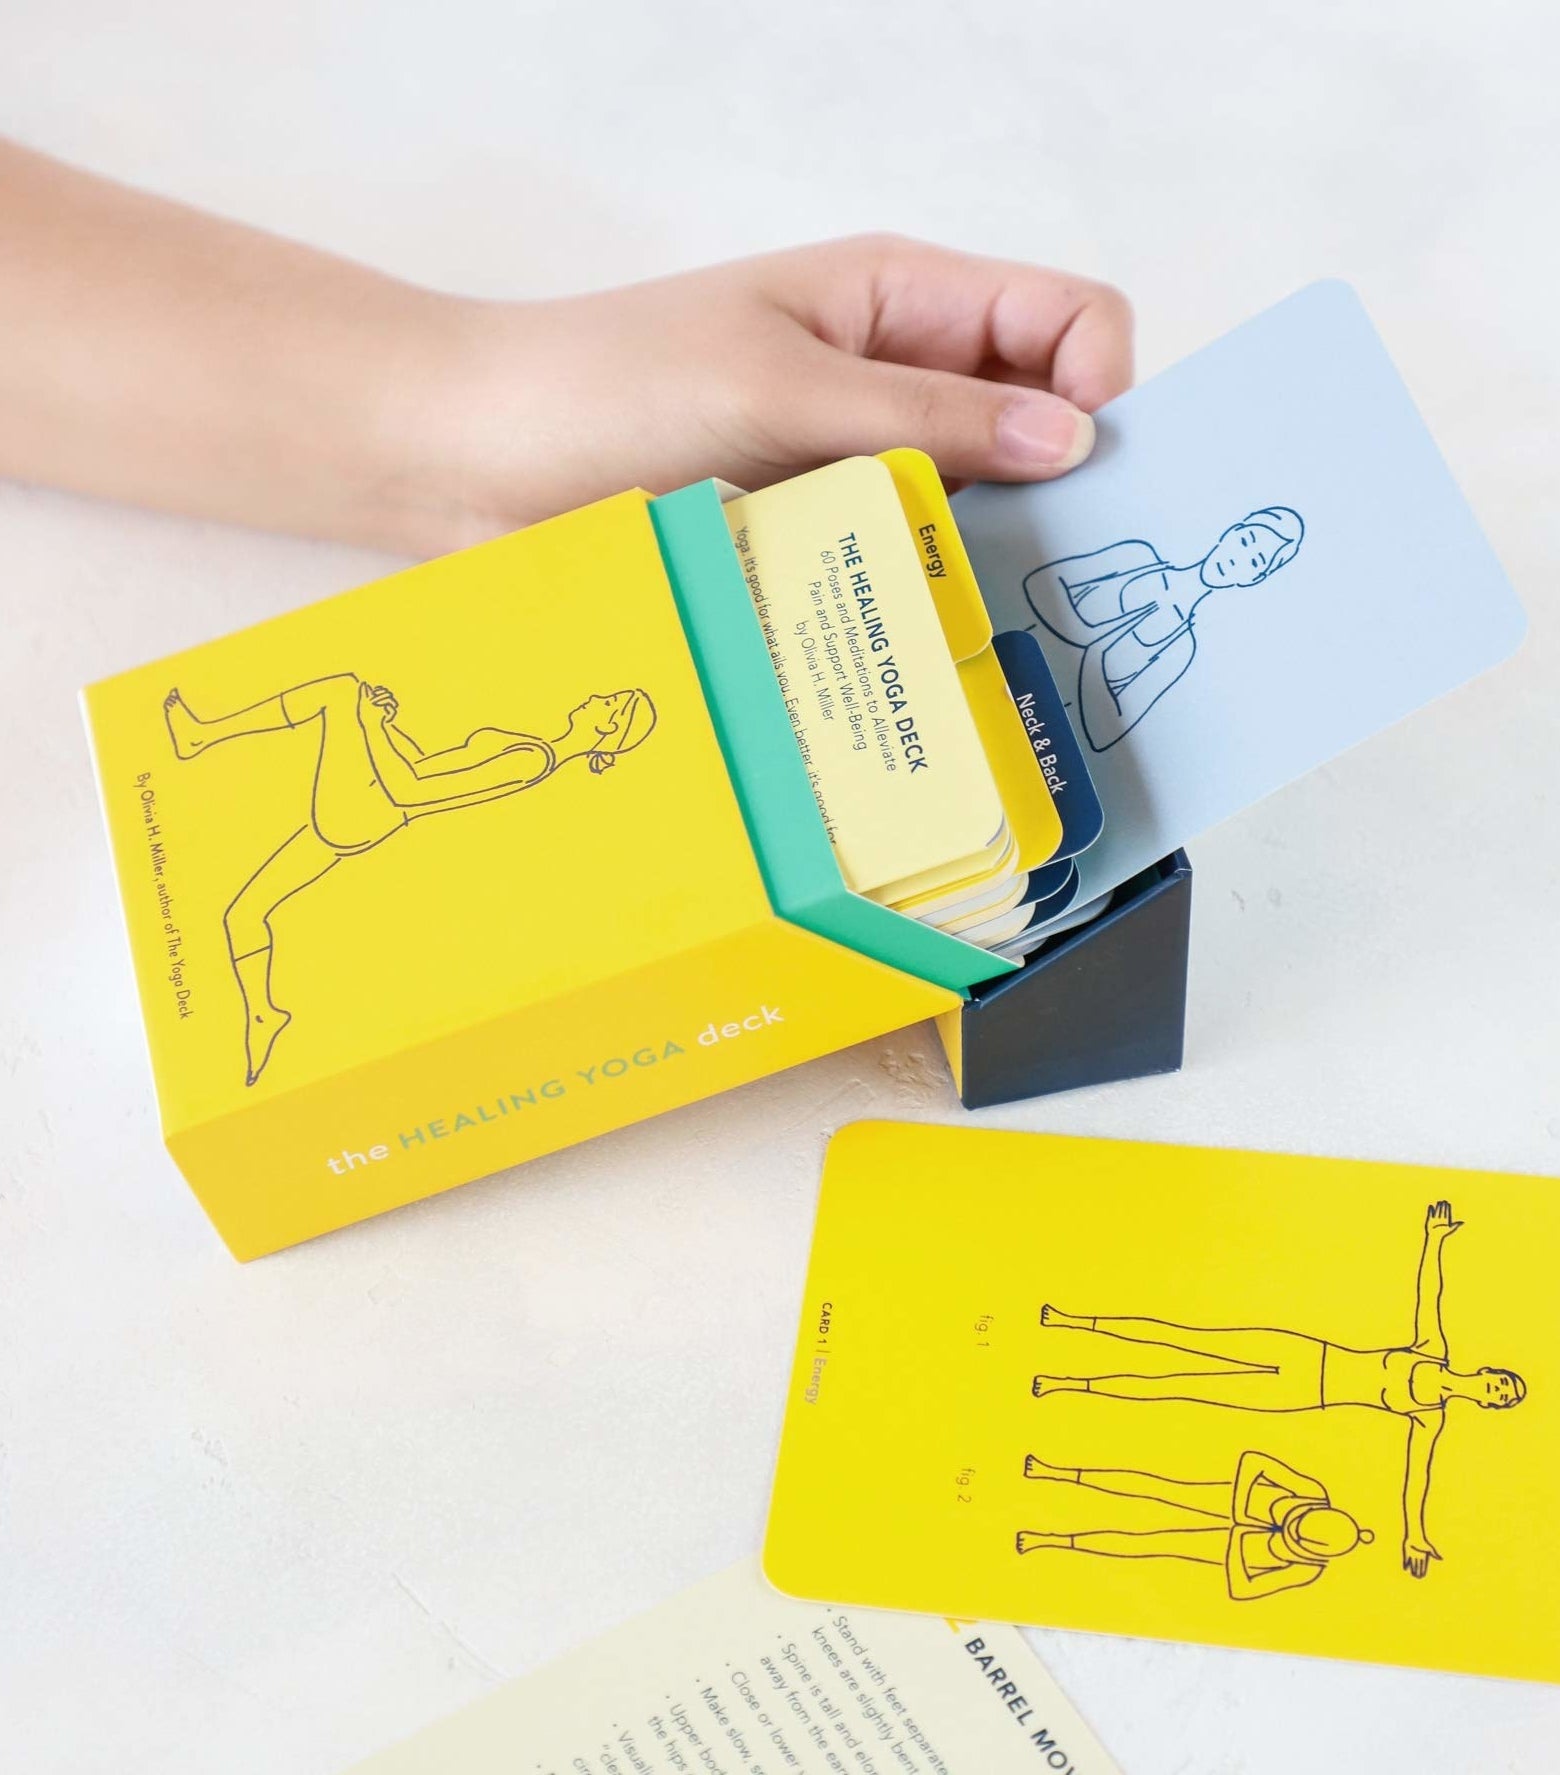 A pack of yoga healing cards laid out on a table